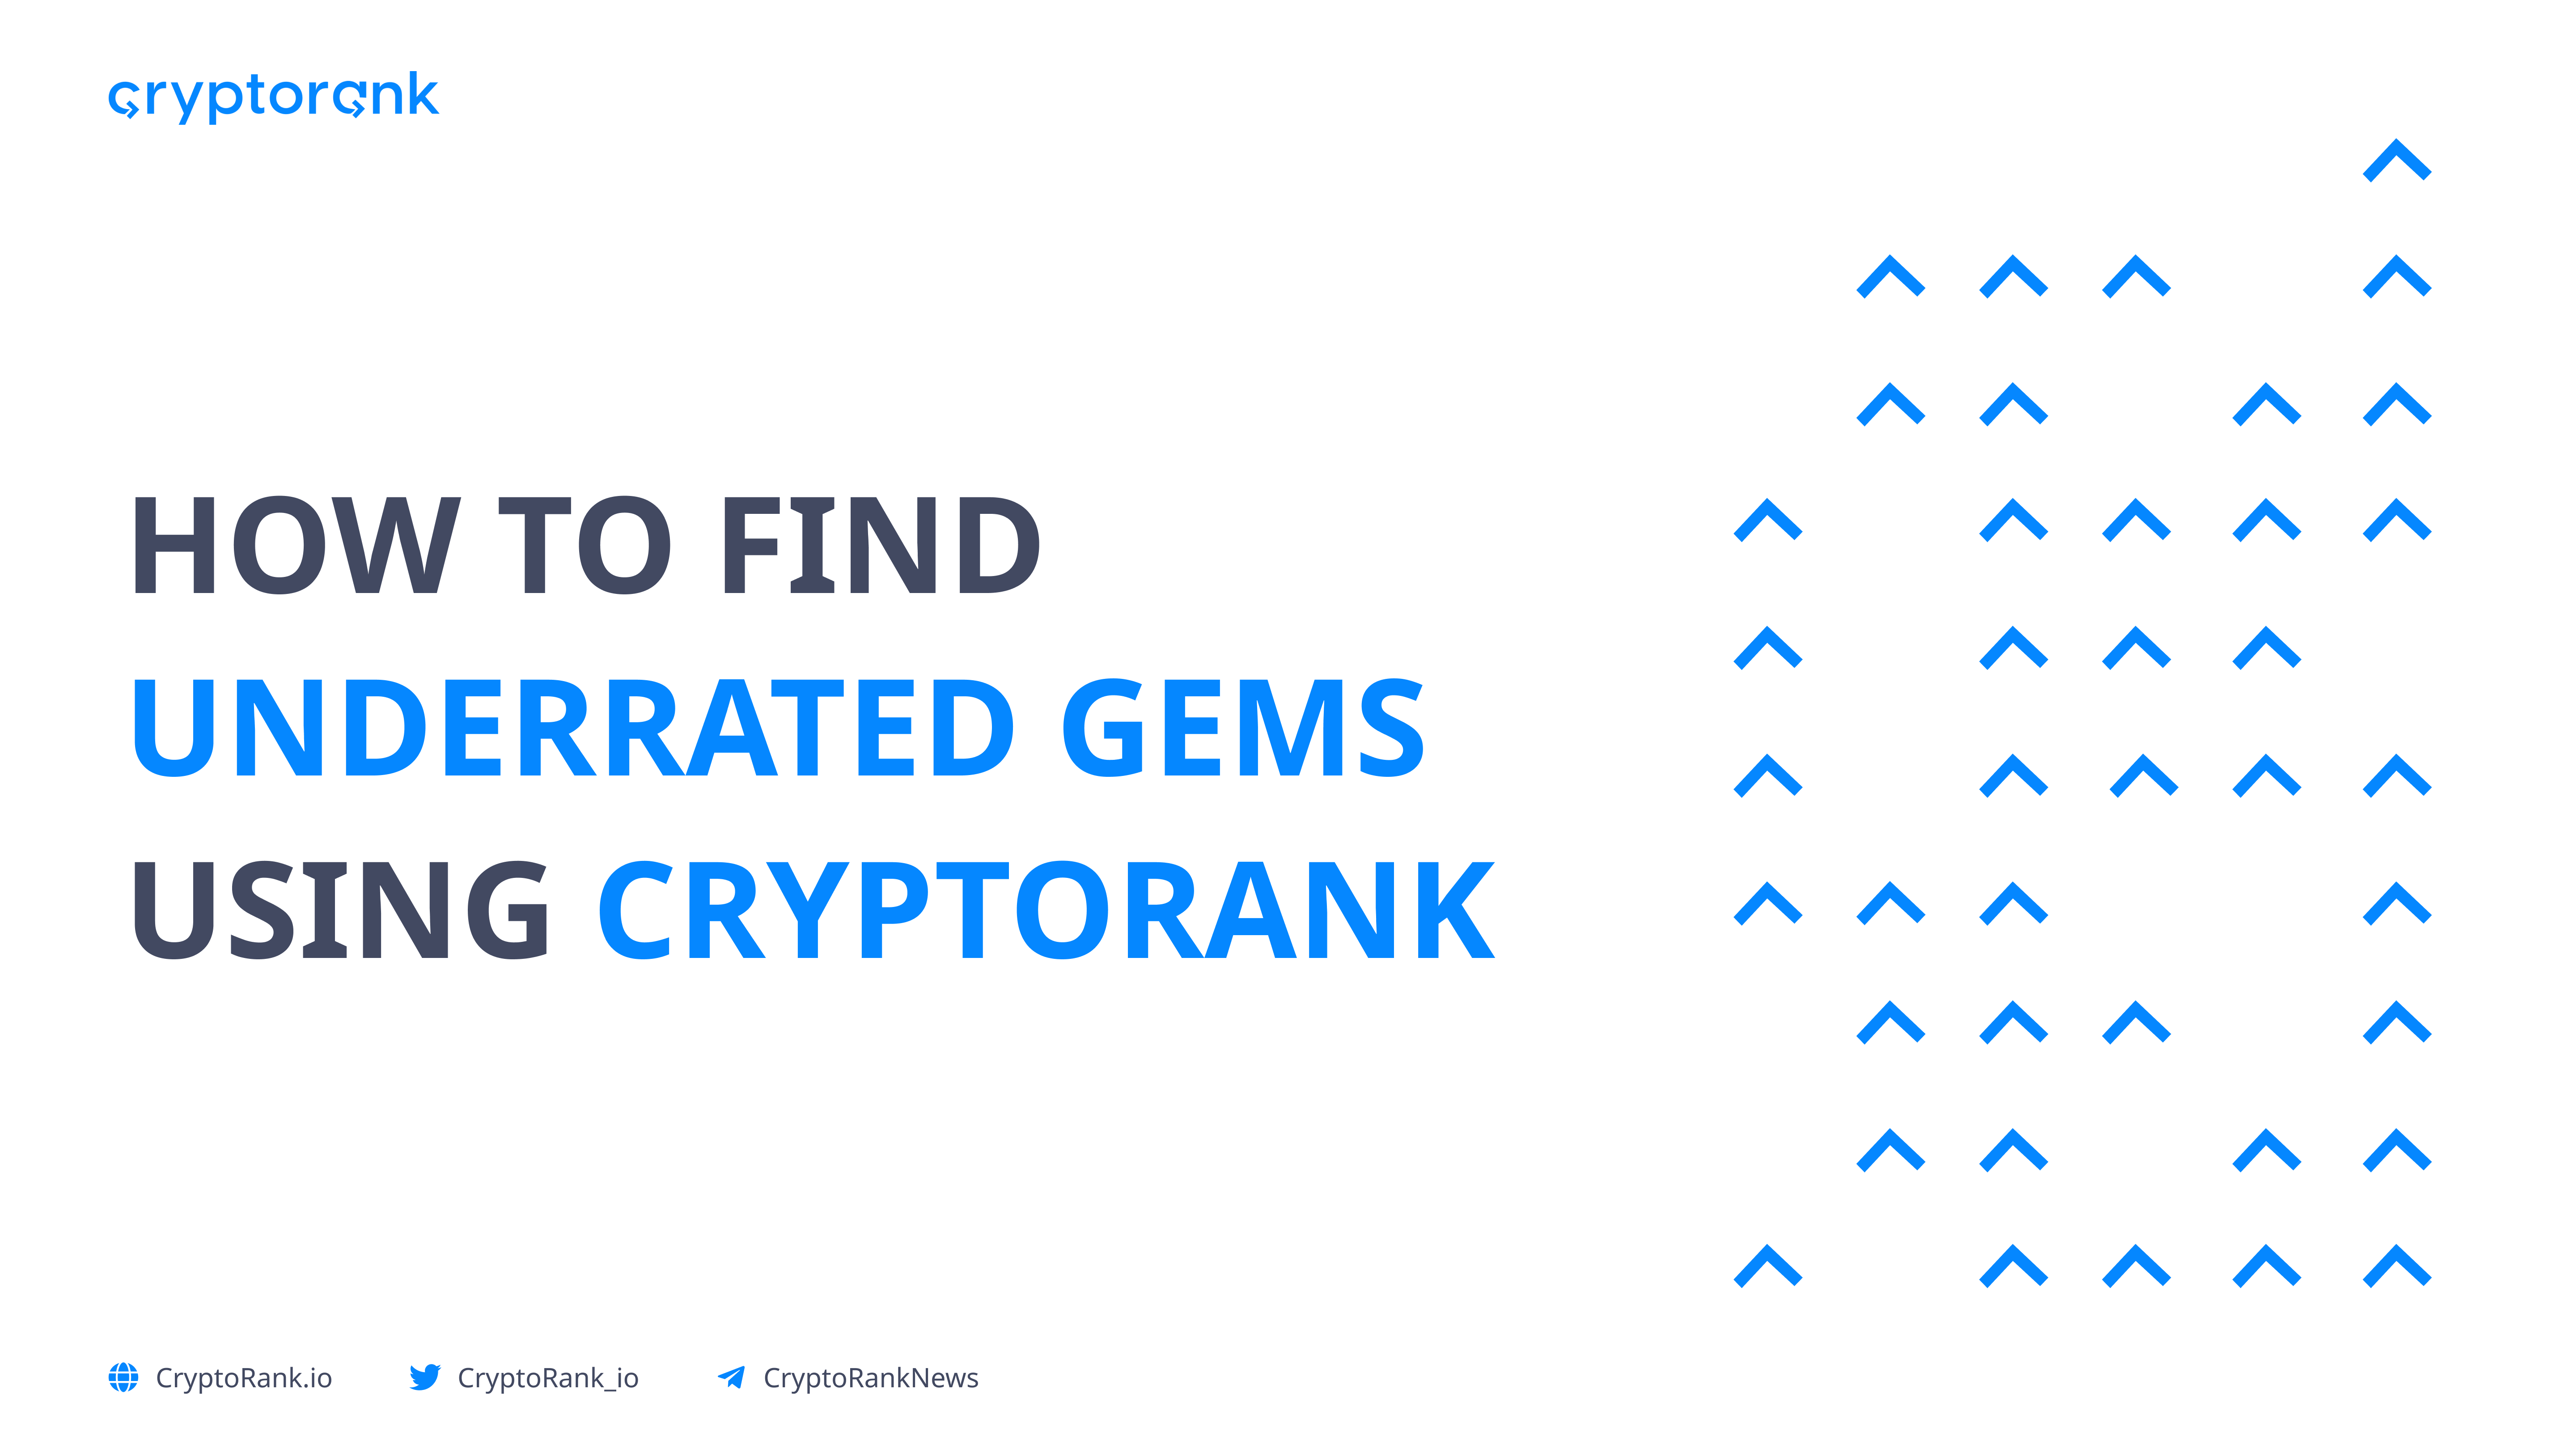 How to Find Underrated Gems using CryptoRank